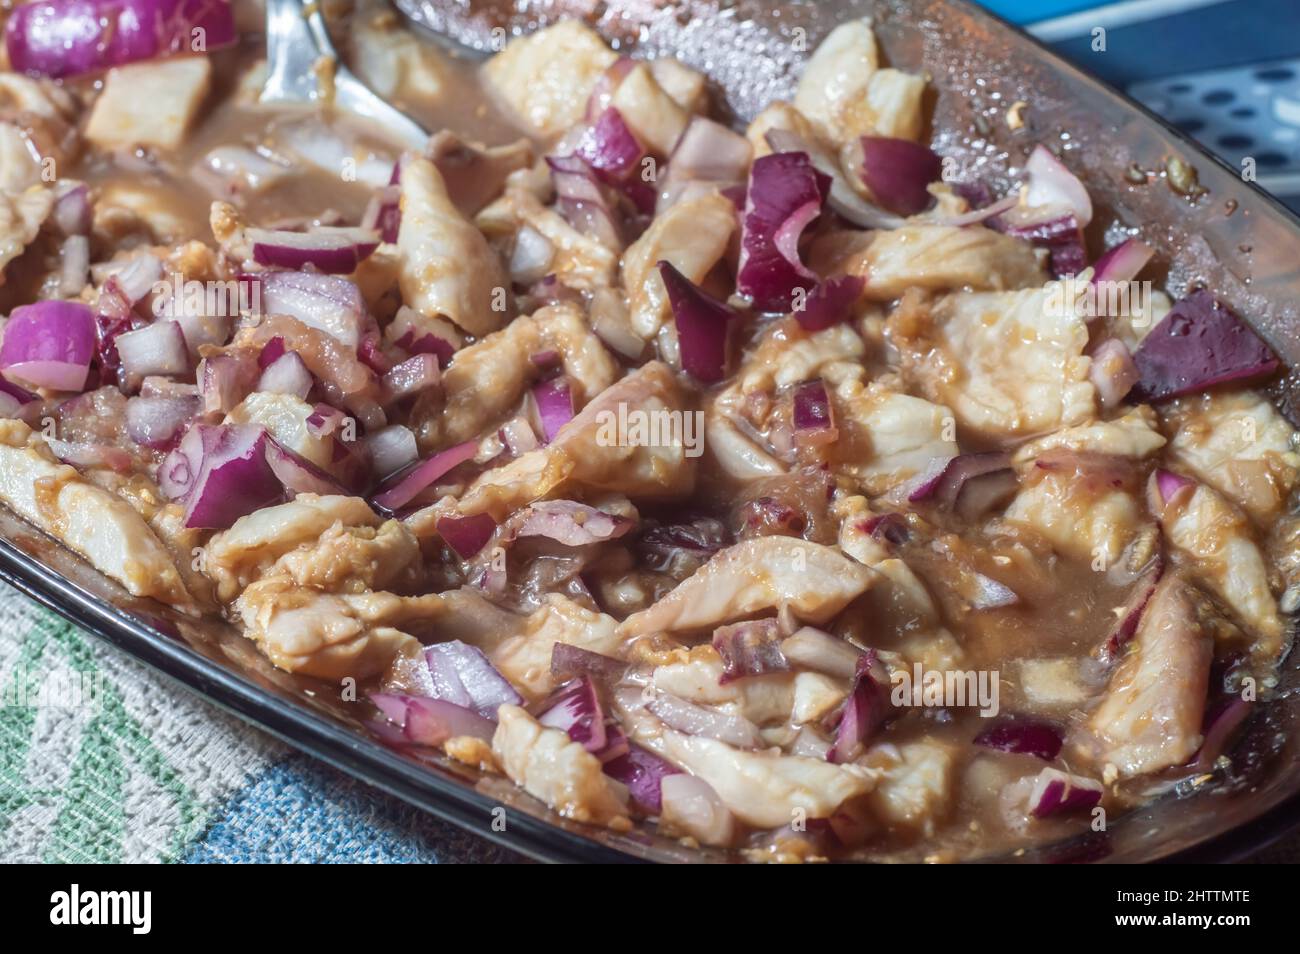 Tilapia sashimi with red onion, lemon and ginger, mixed with sliced tilapia fillet. Stock Photo